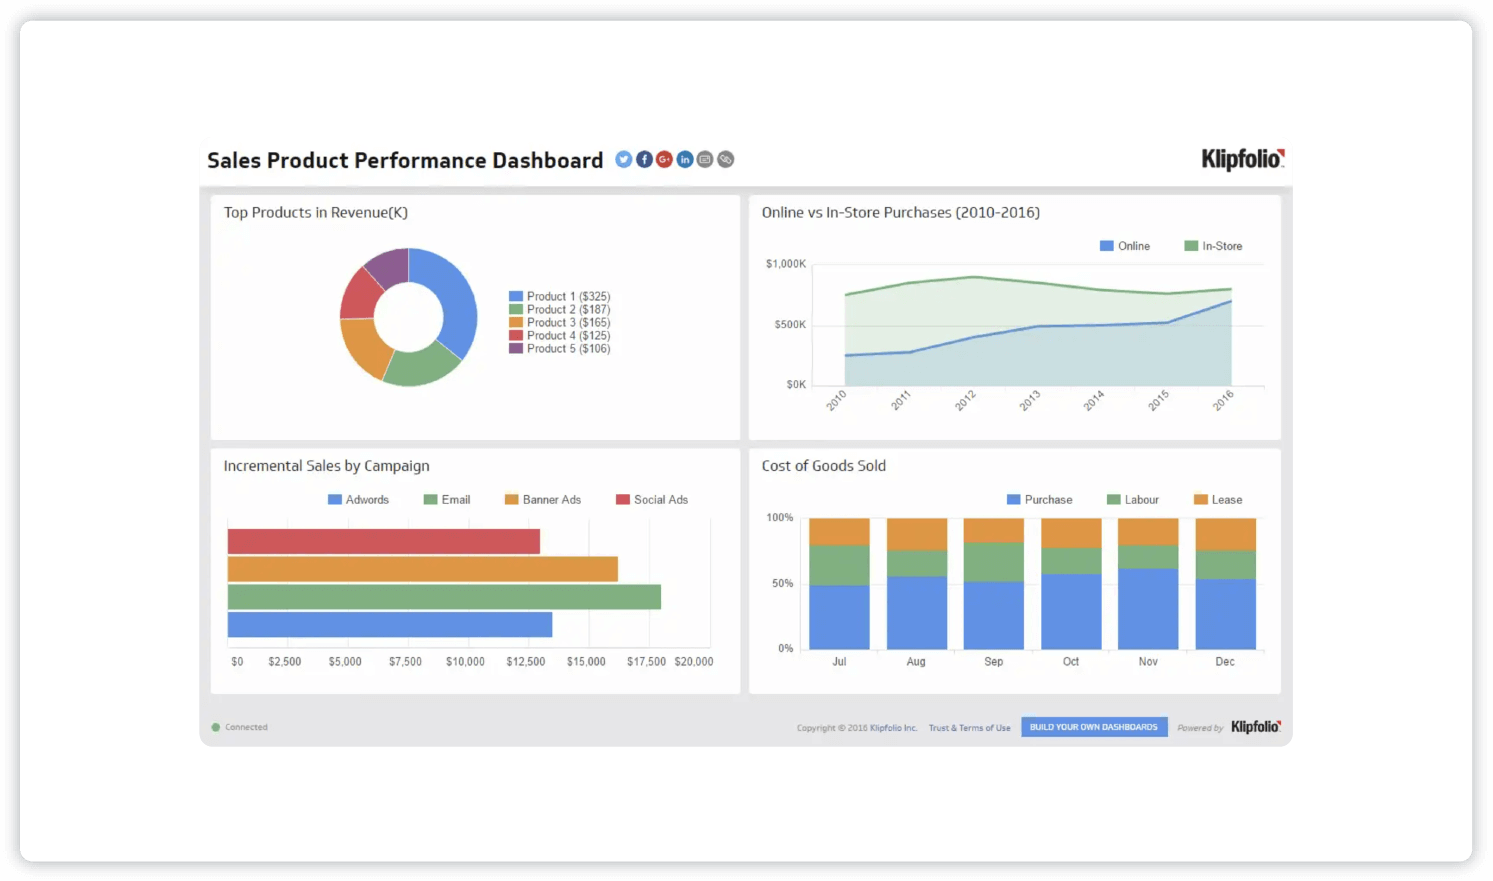 Screenshot of Klipfolio sales product performance dashboard that shows a pie chart of top product revenue, a comparison of online vs. in-store purchases, a bar graph comparing sales campaign successes, and the cost of goods sold. 